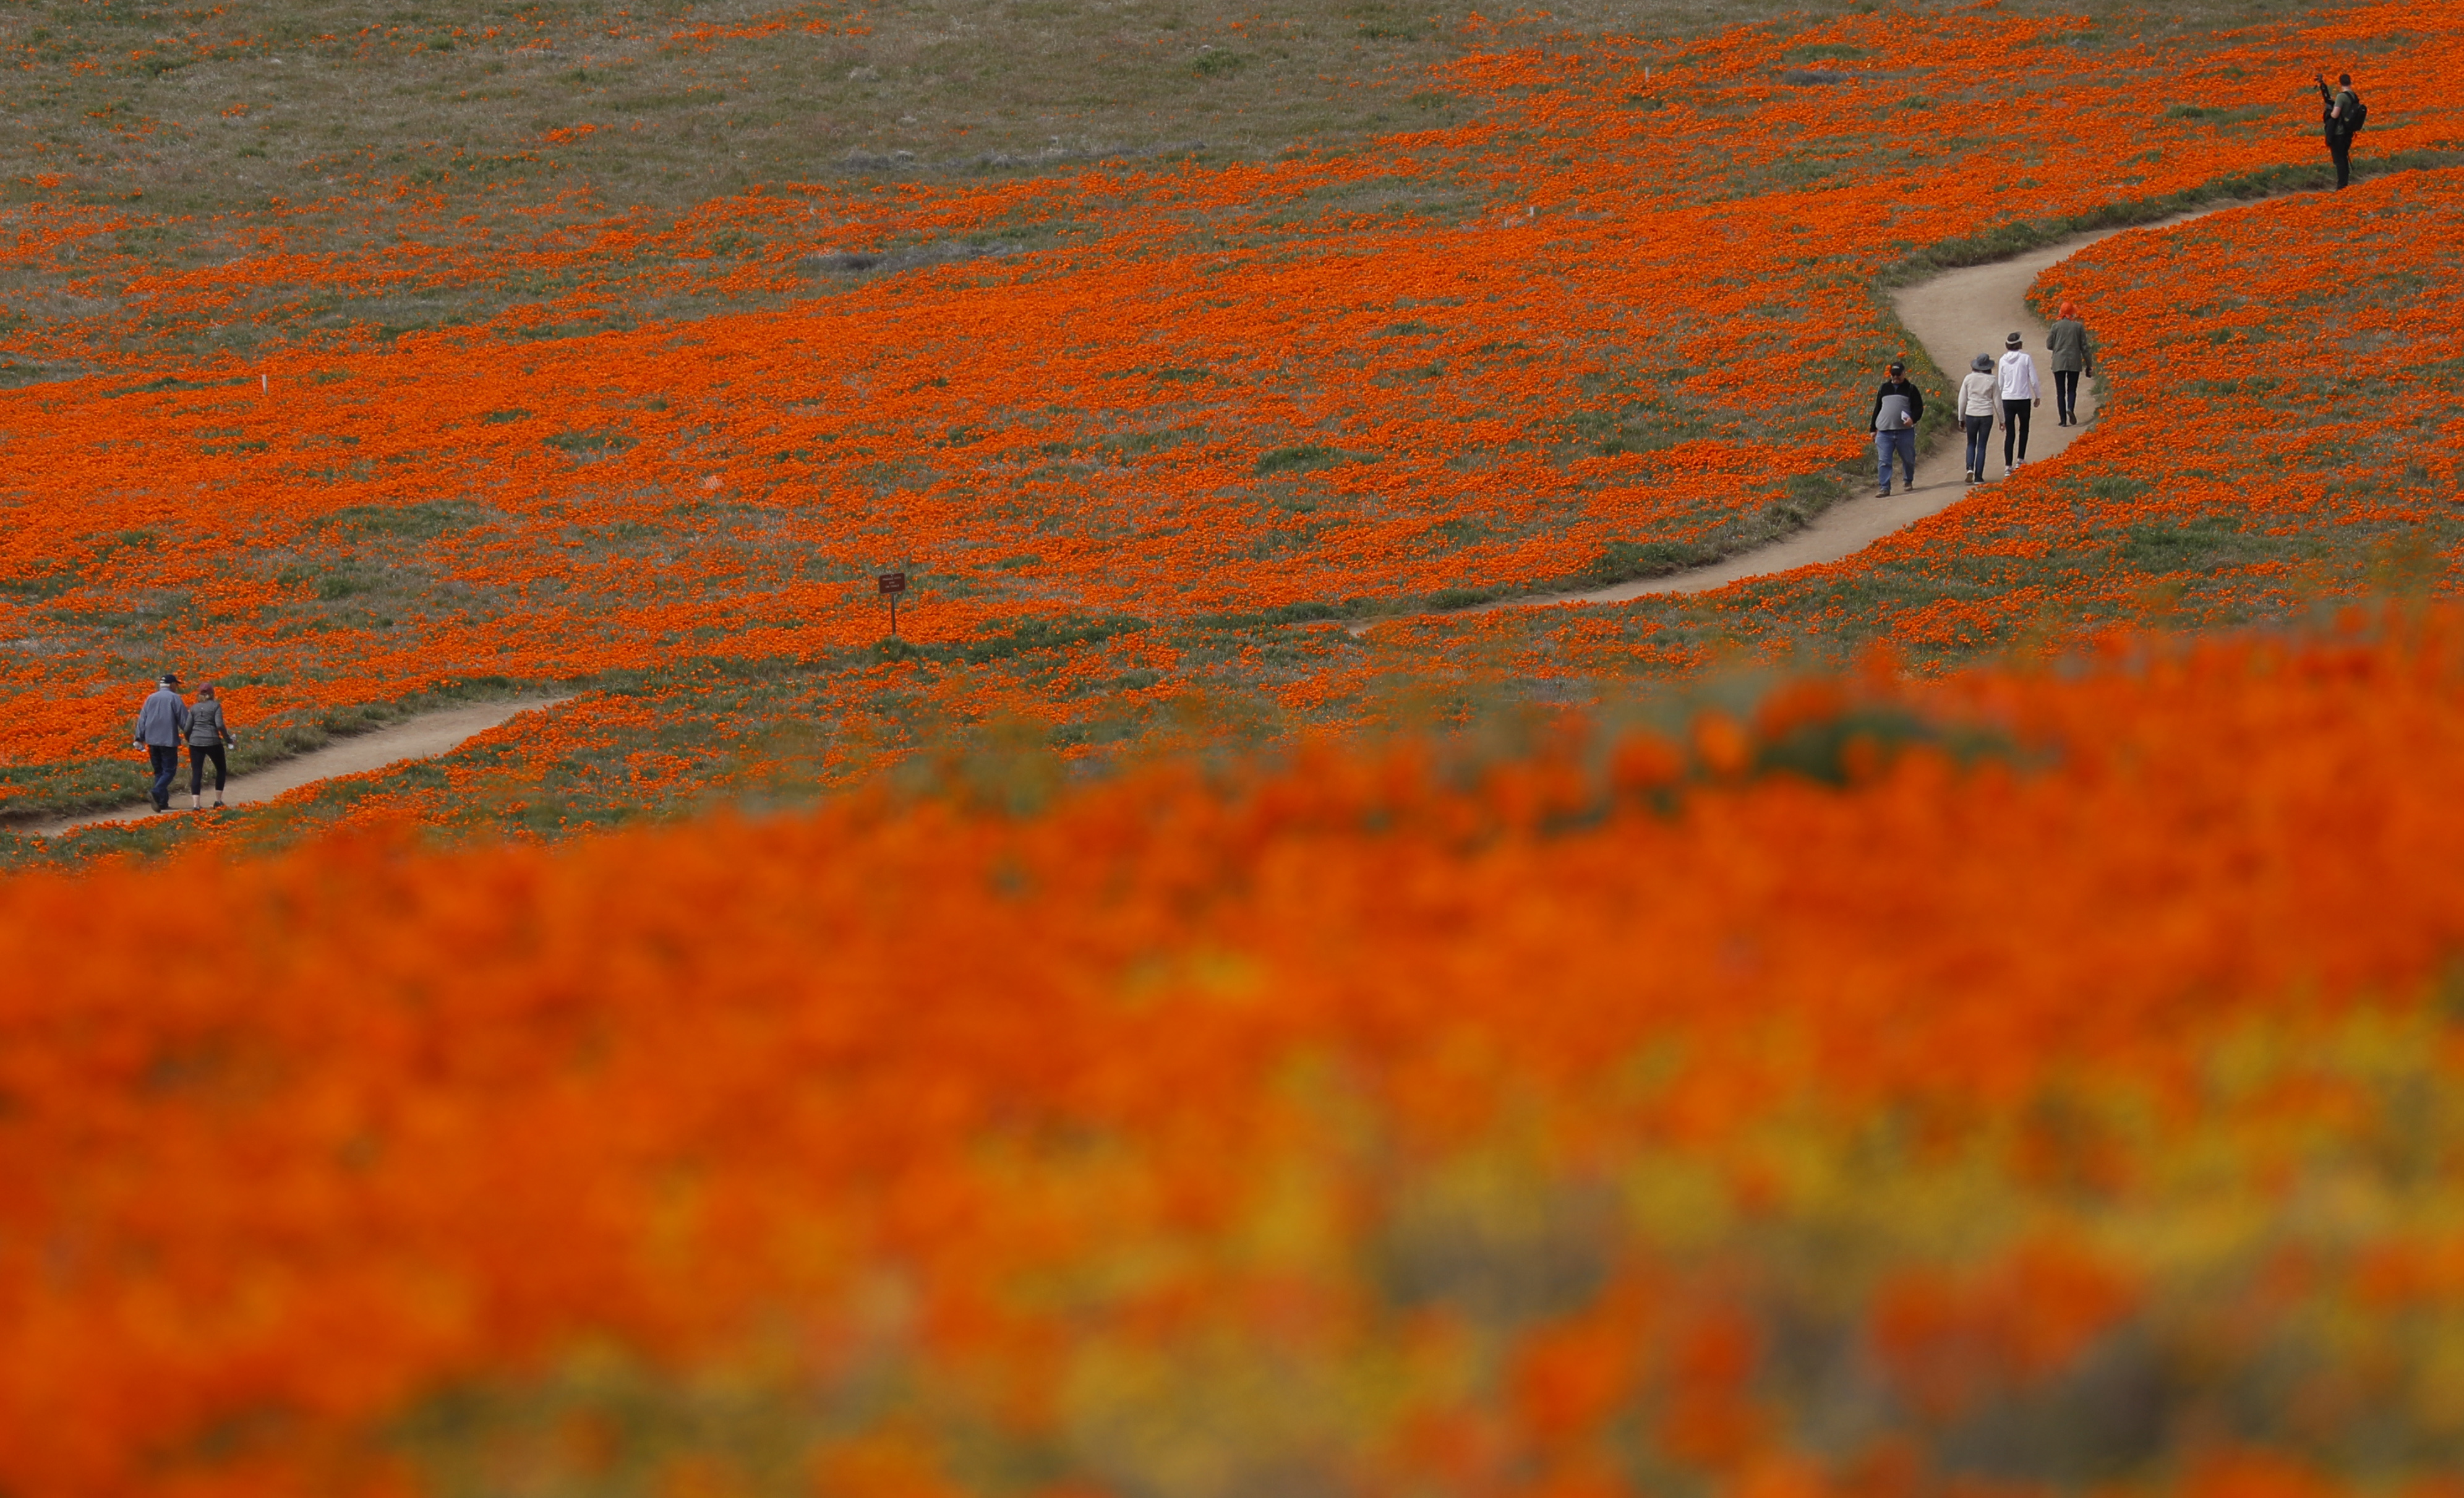 Visitors walk on a meandering path through fields of California Poppies in the Antelope Valley California Poppy Reserve State Natural Reserve on March 26, 2019, in Lancaster, California.